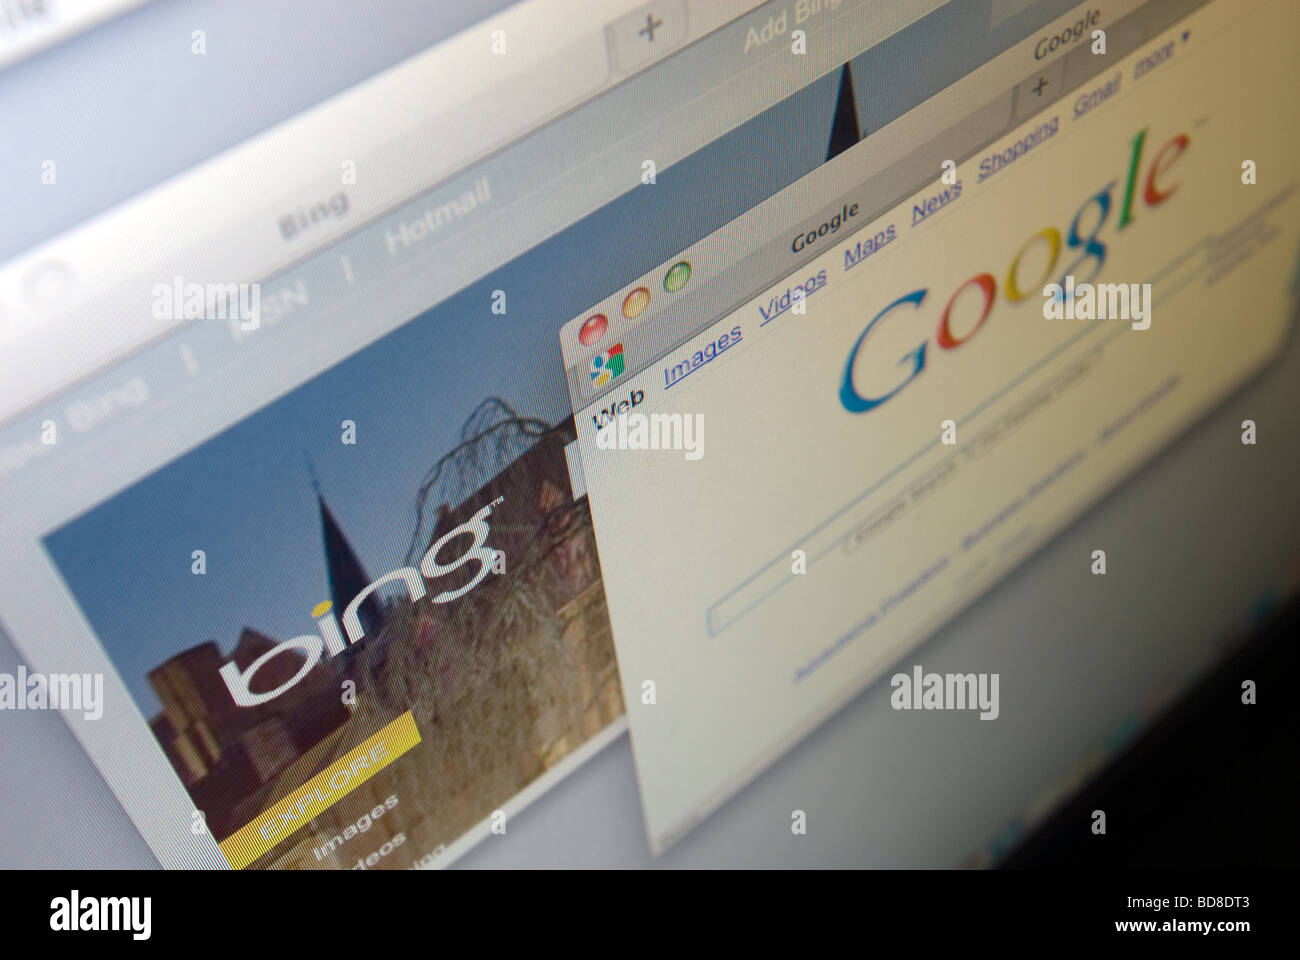 Microsoft s Bing and Google search engines are seen on a computer screen Stock Photo